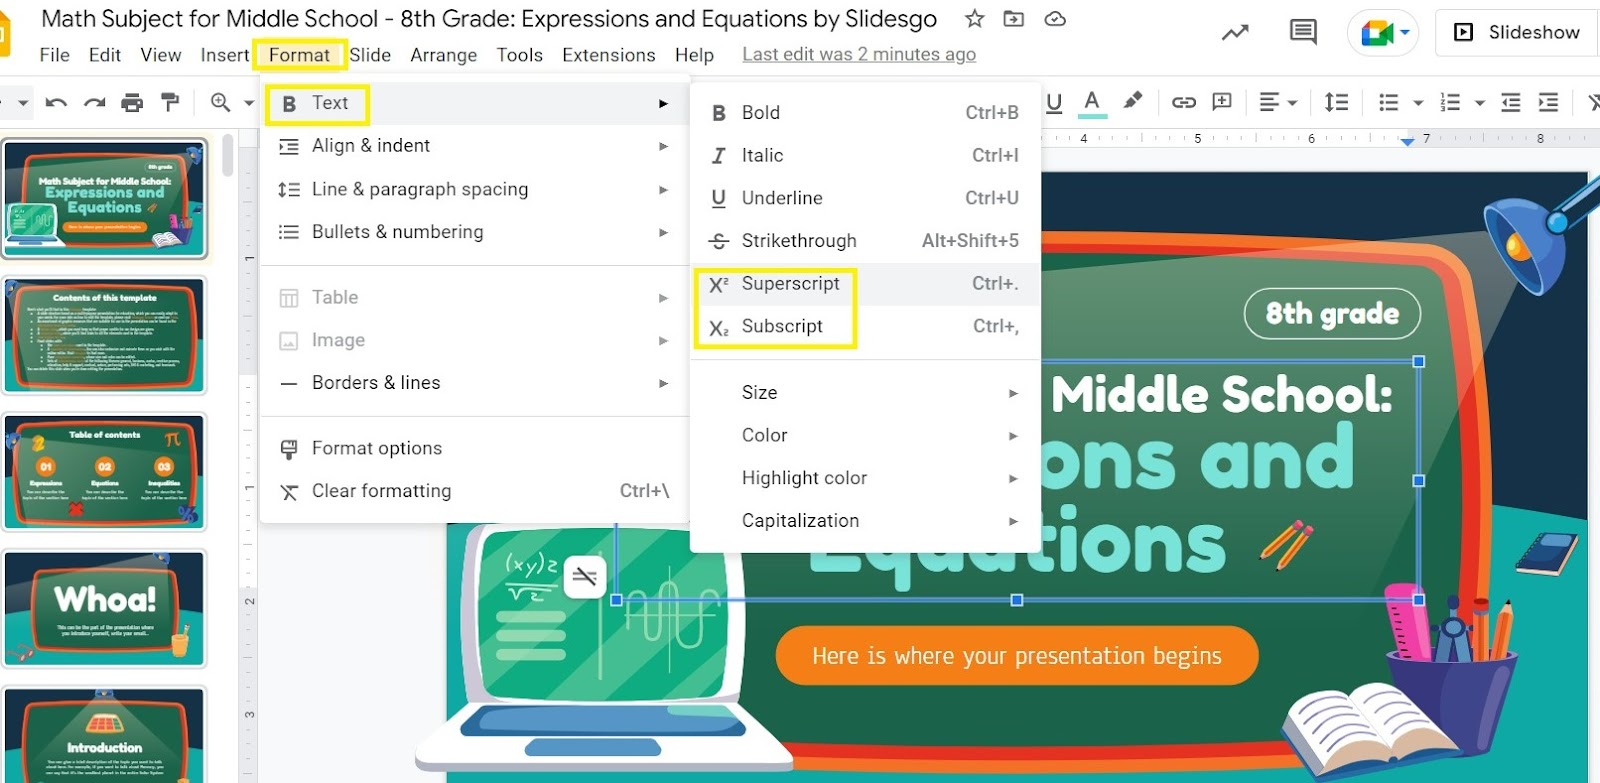 How to Add Superscript and Subscript in Google Slides